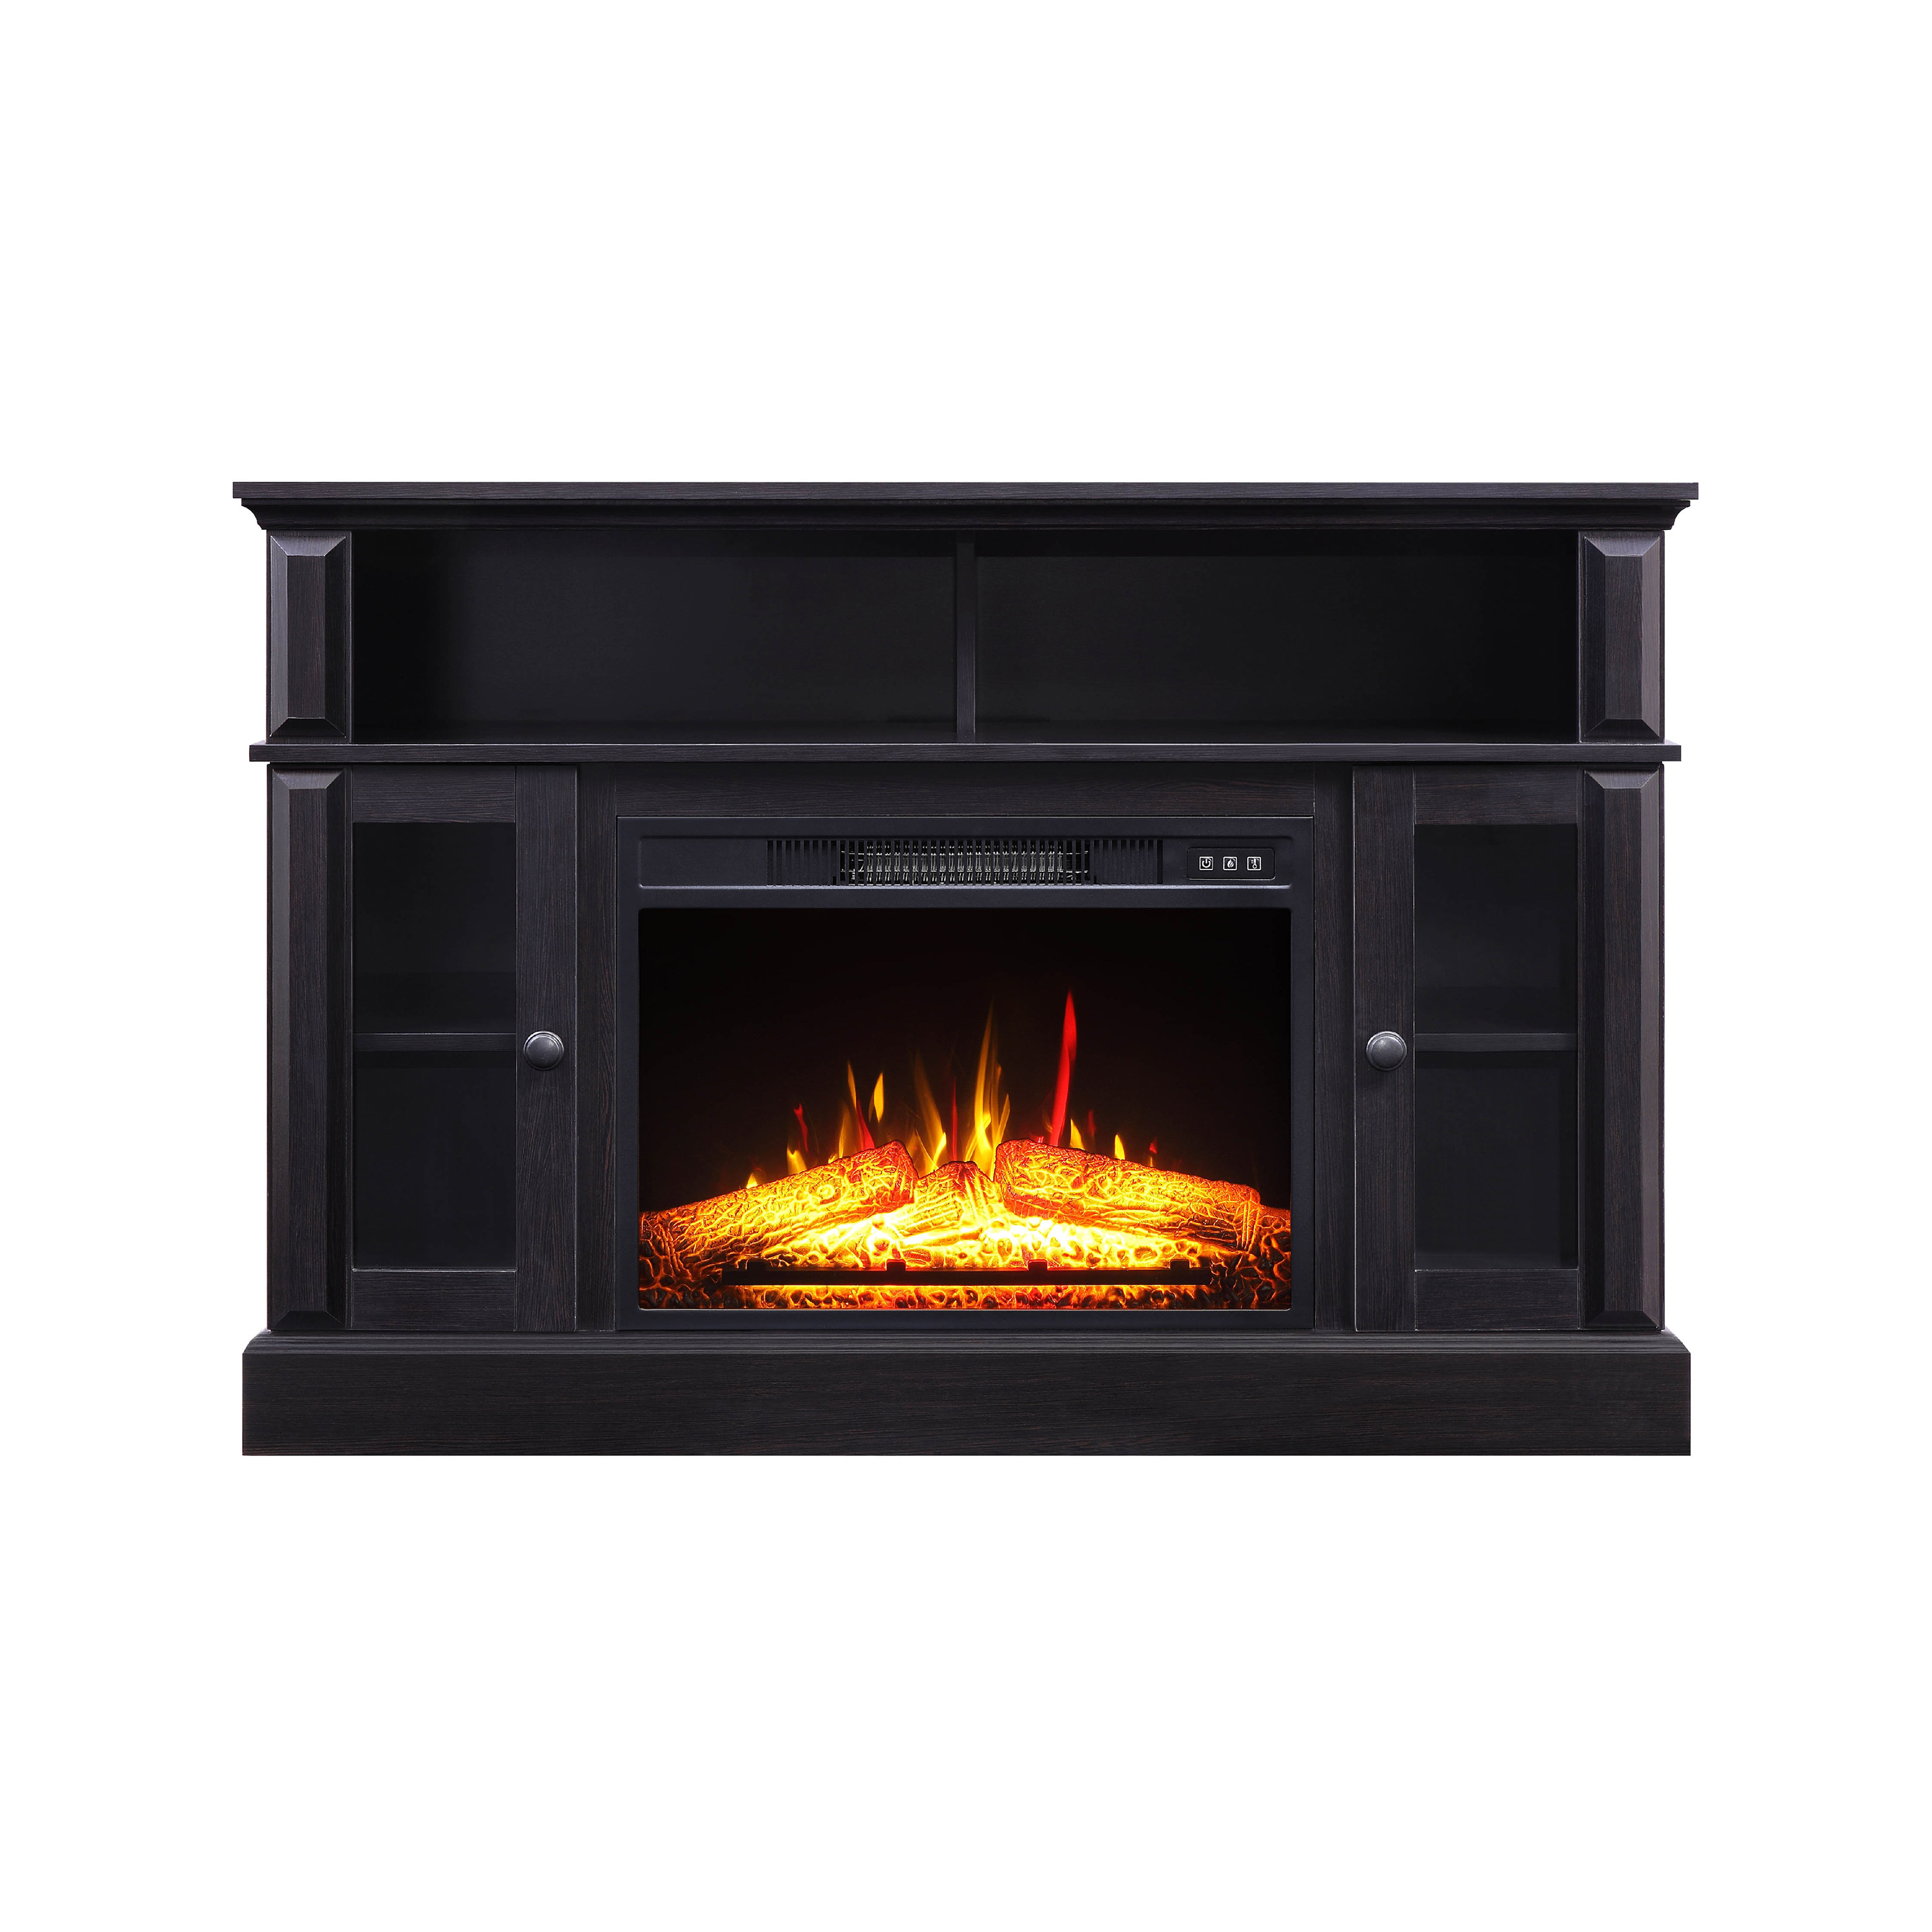 Whalen Barston Media Fireplace Console for TV's up to 55”, Espresso Finish - image 8 of 11